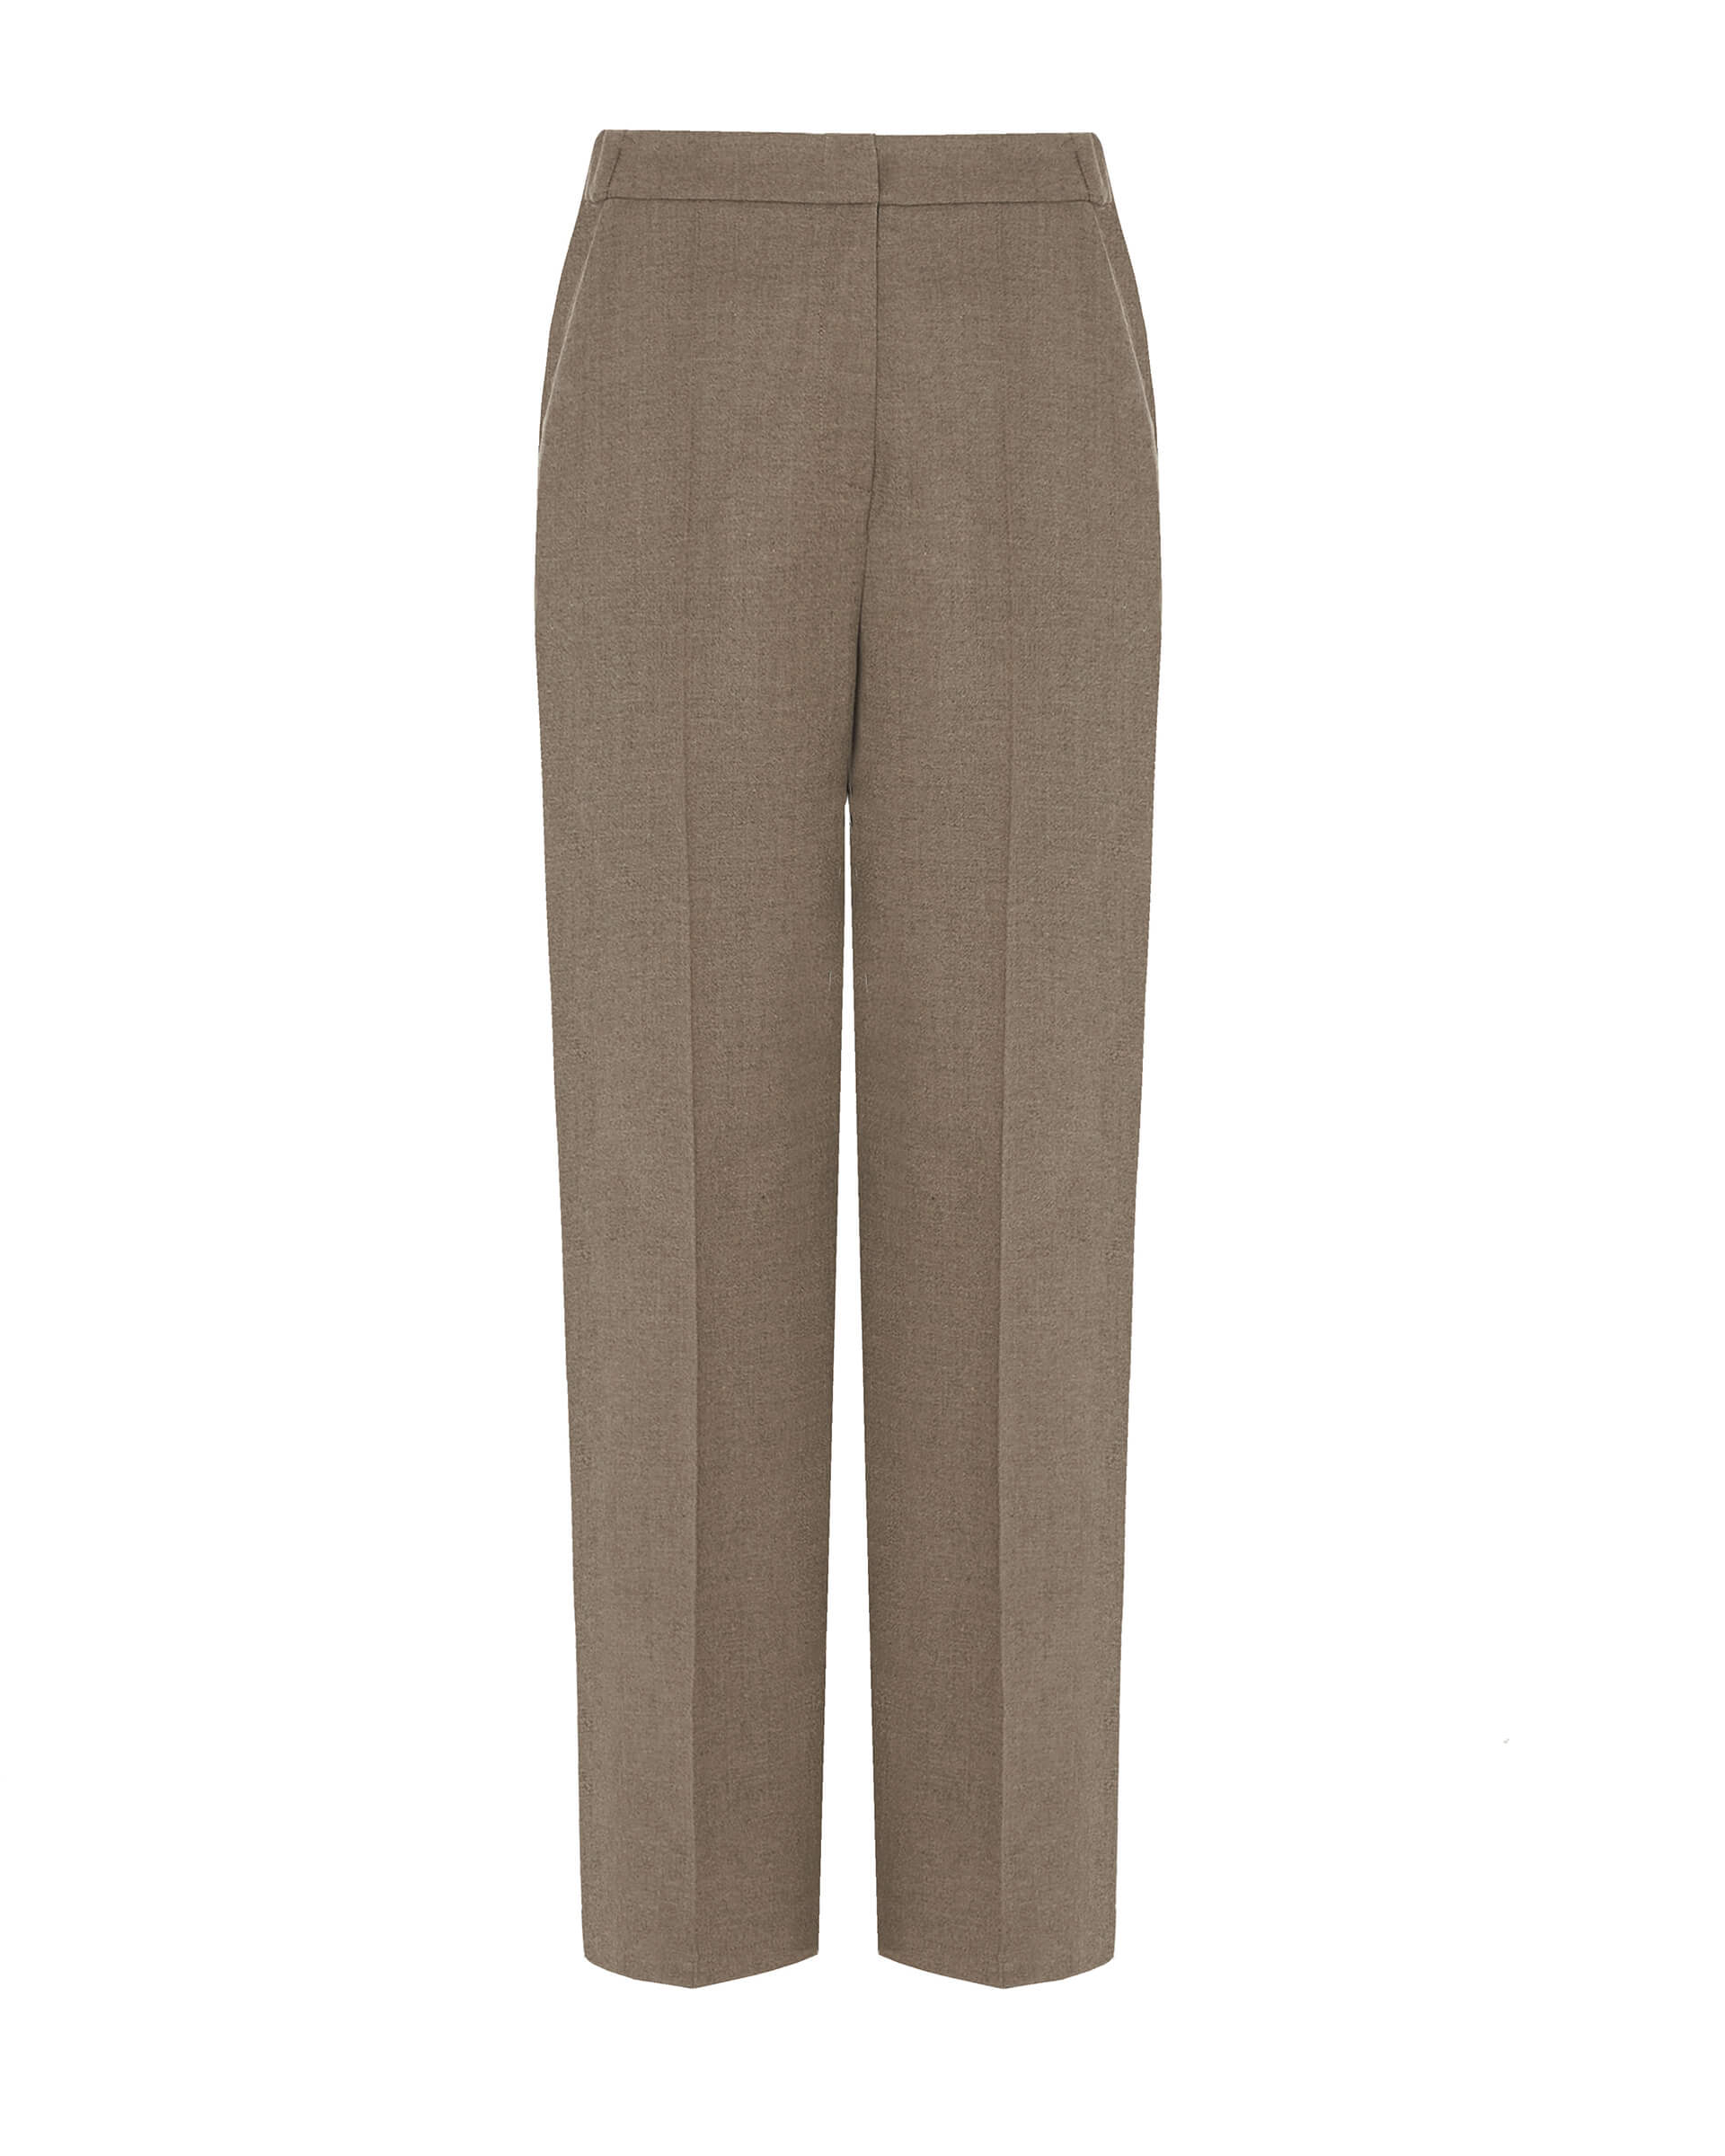 Trousers and jeans for women | Beatrice .b online shop